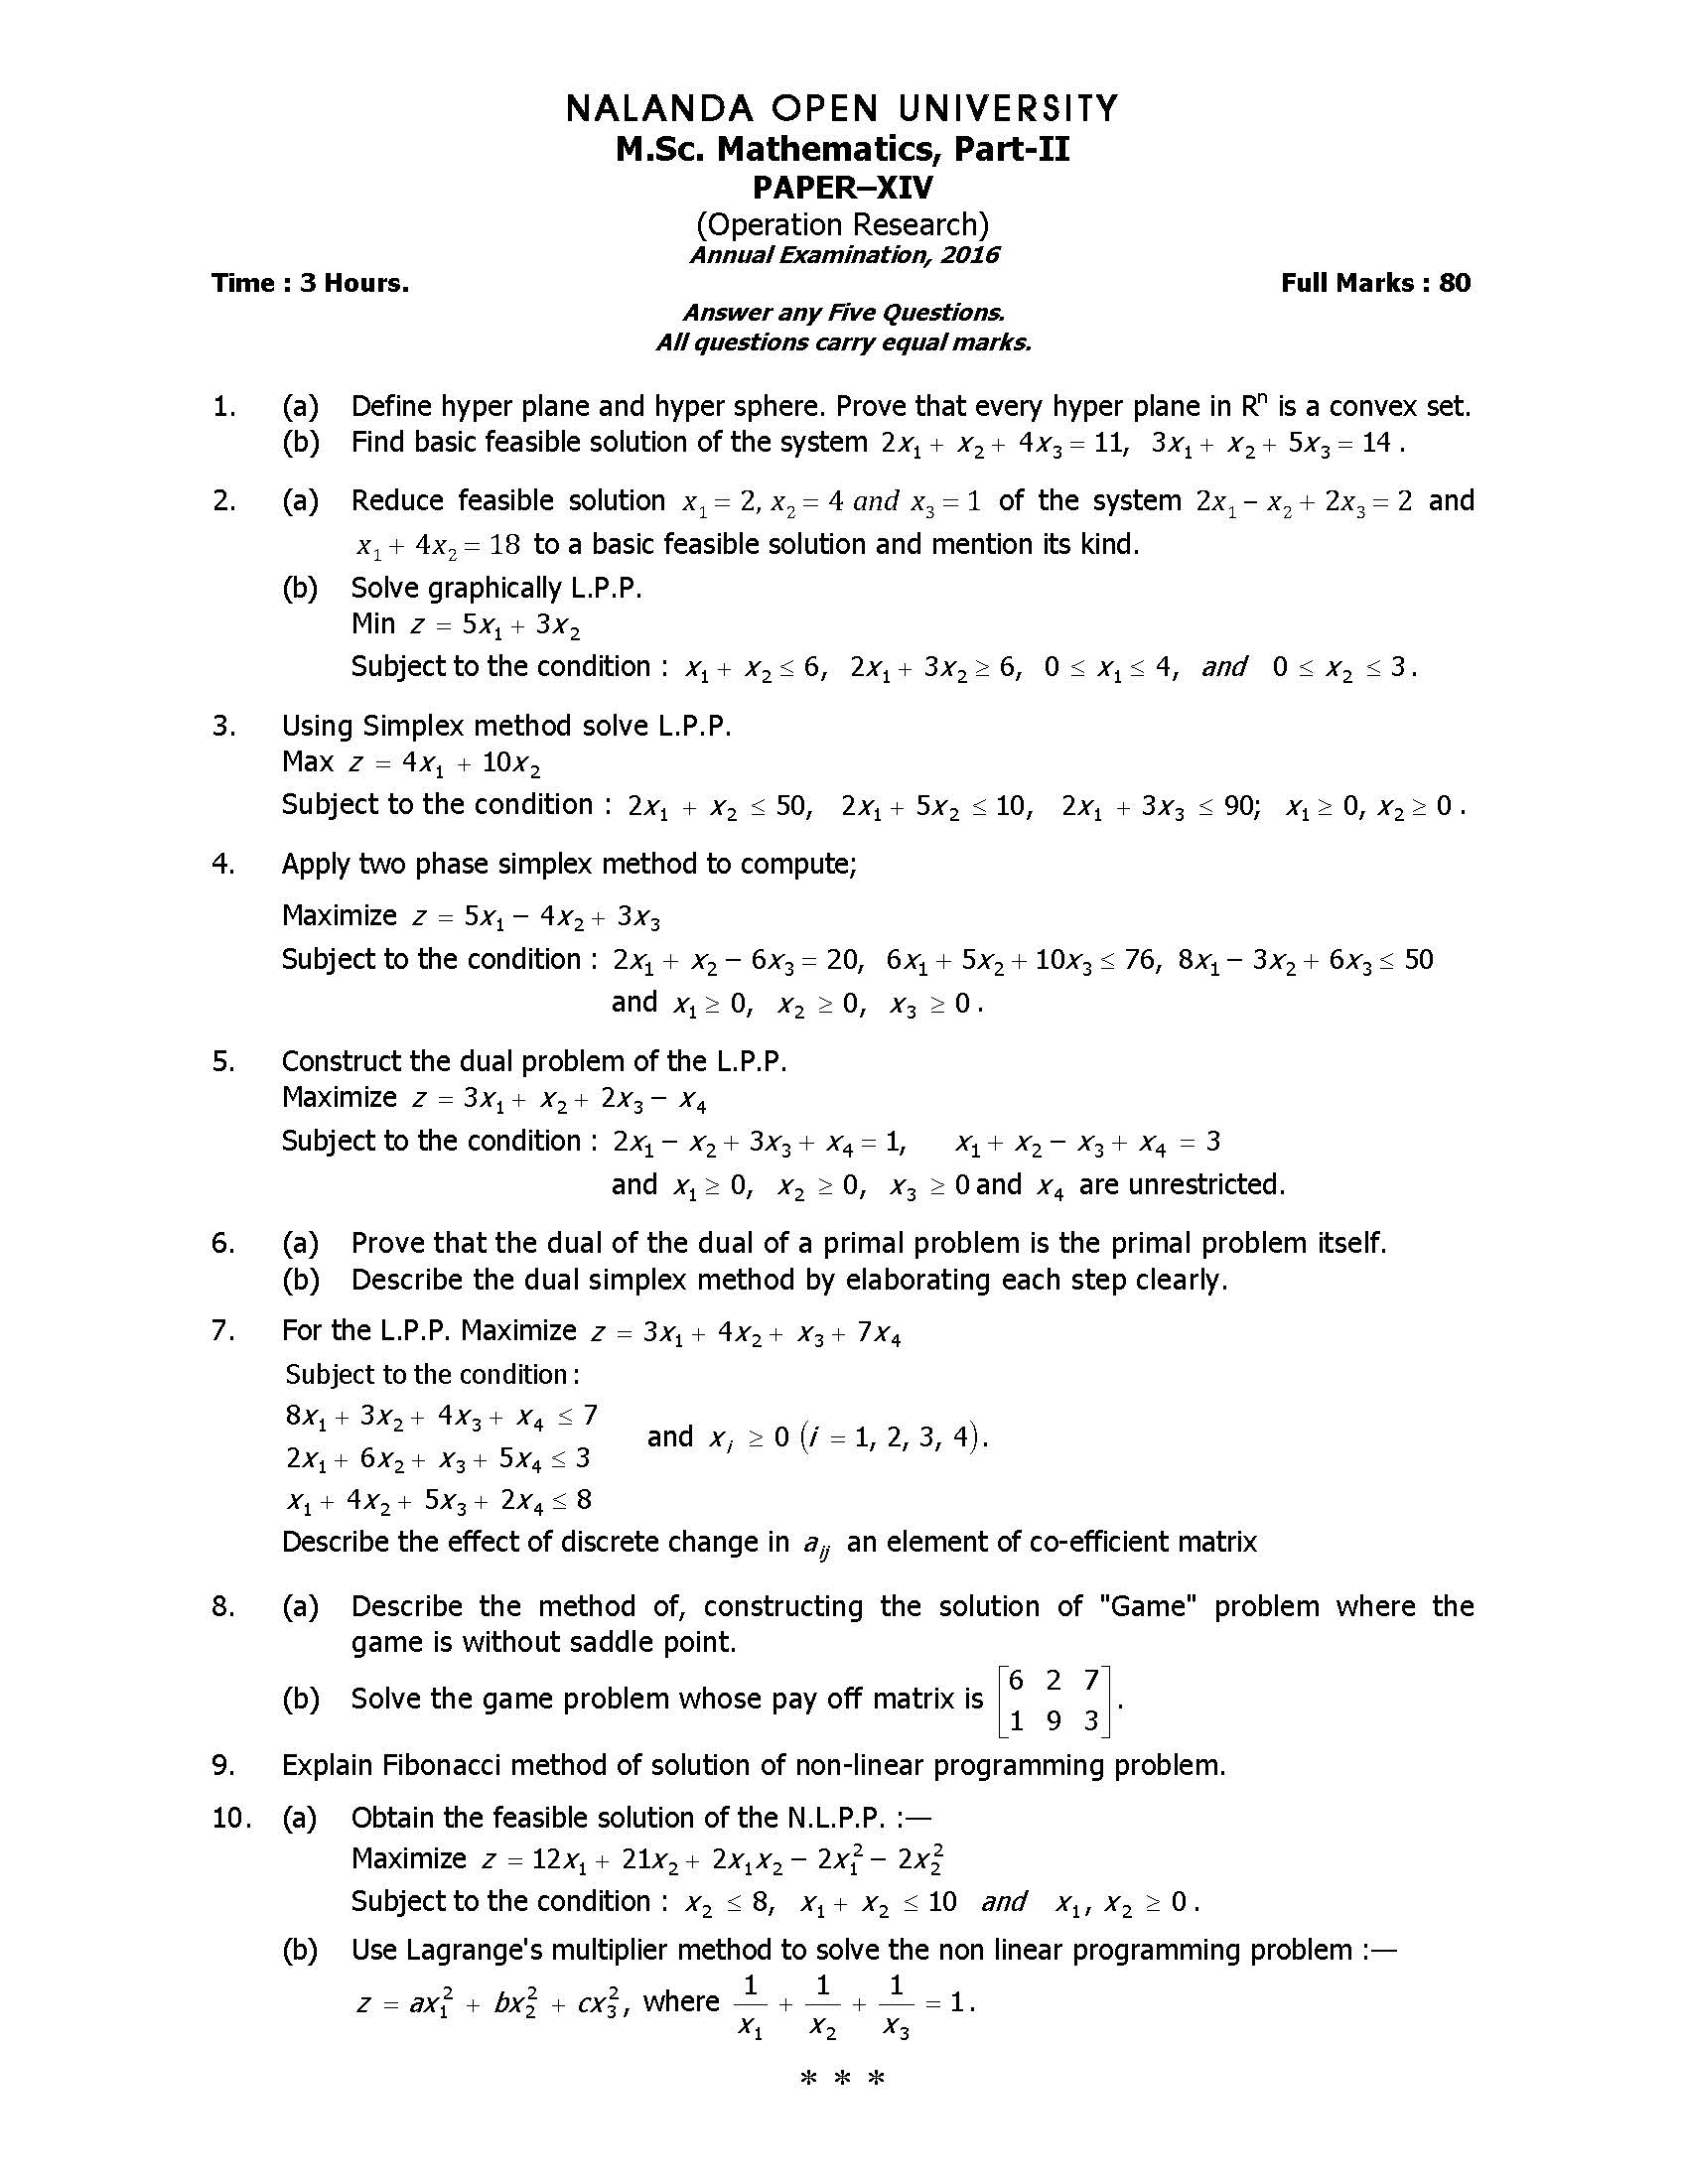 operation research question paper